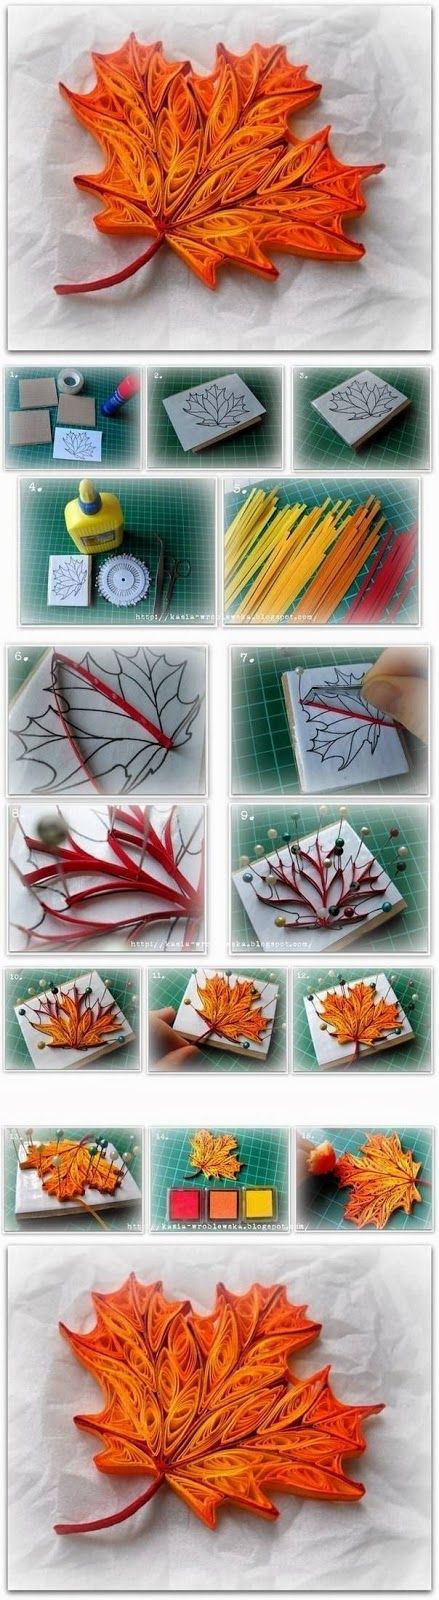 quilling a maple leaf